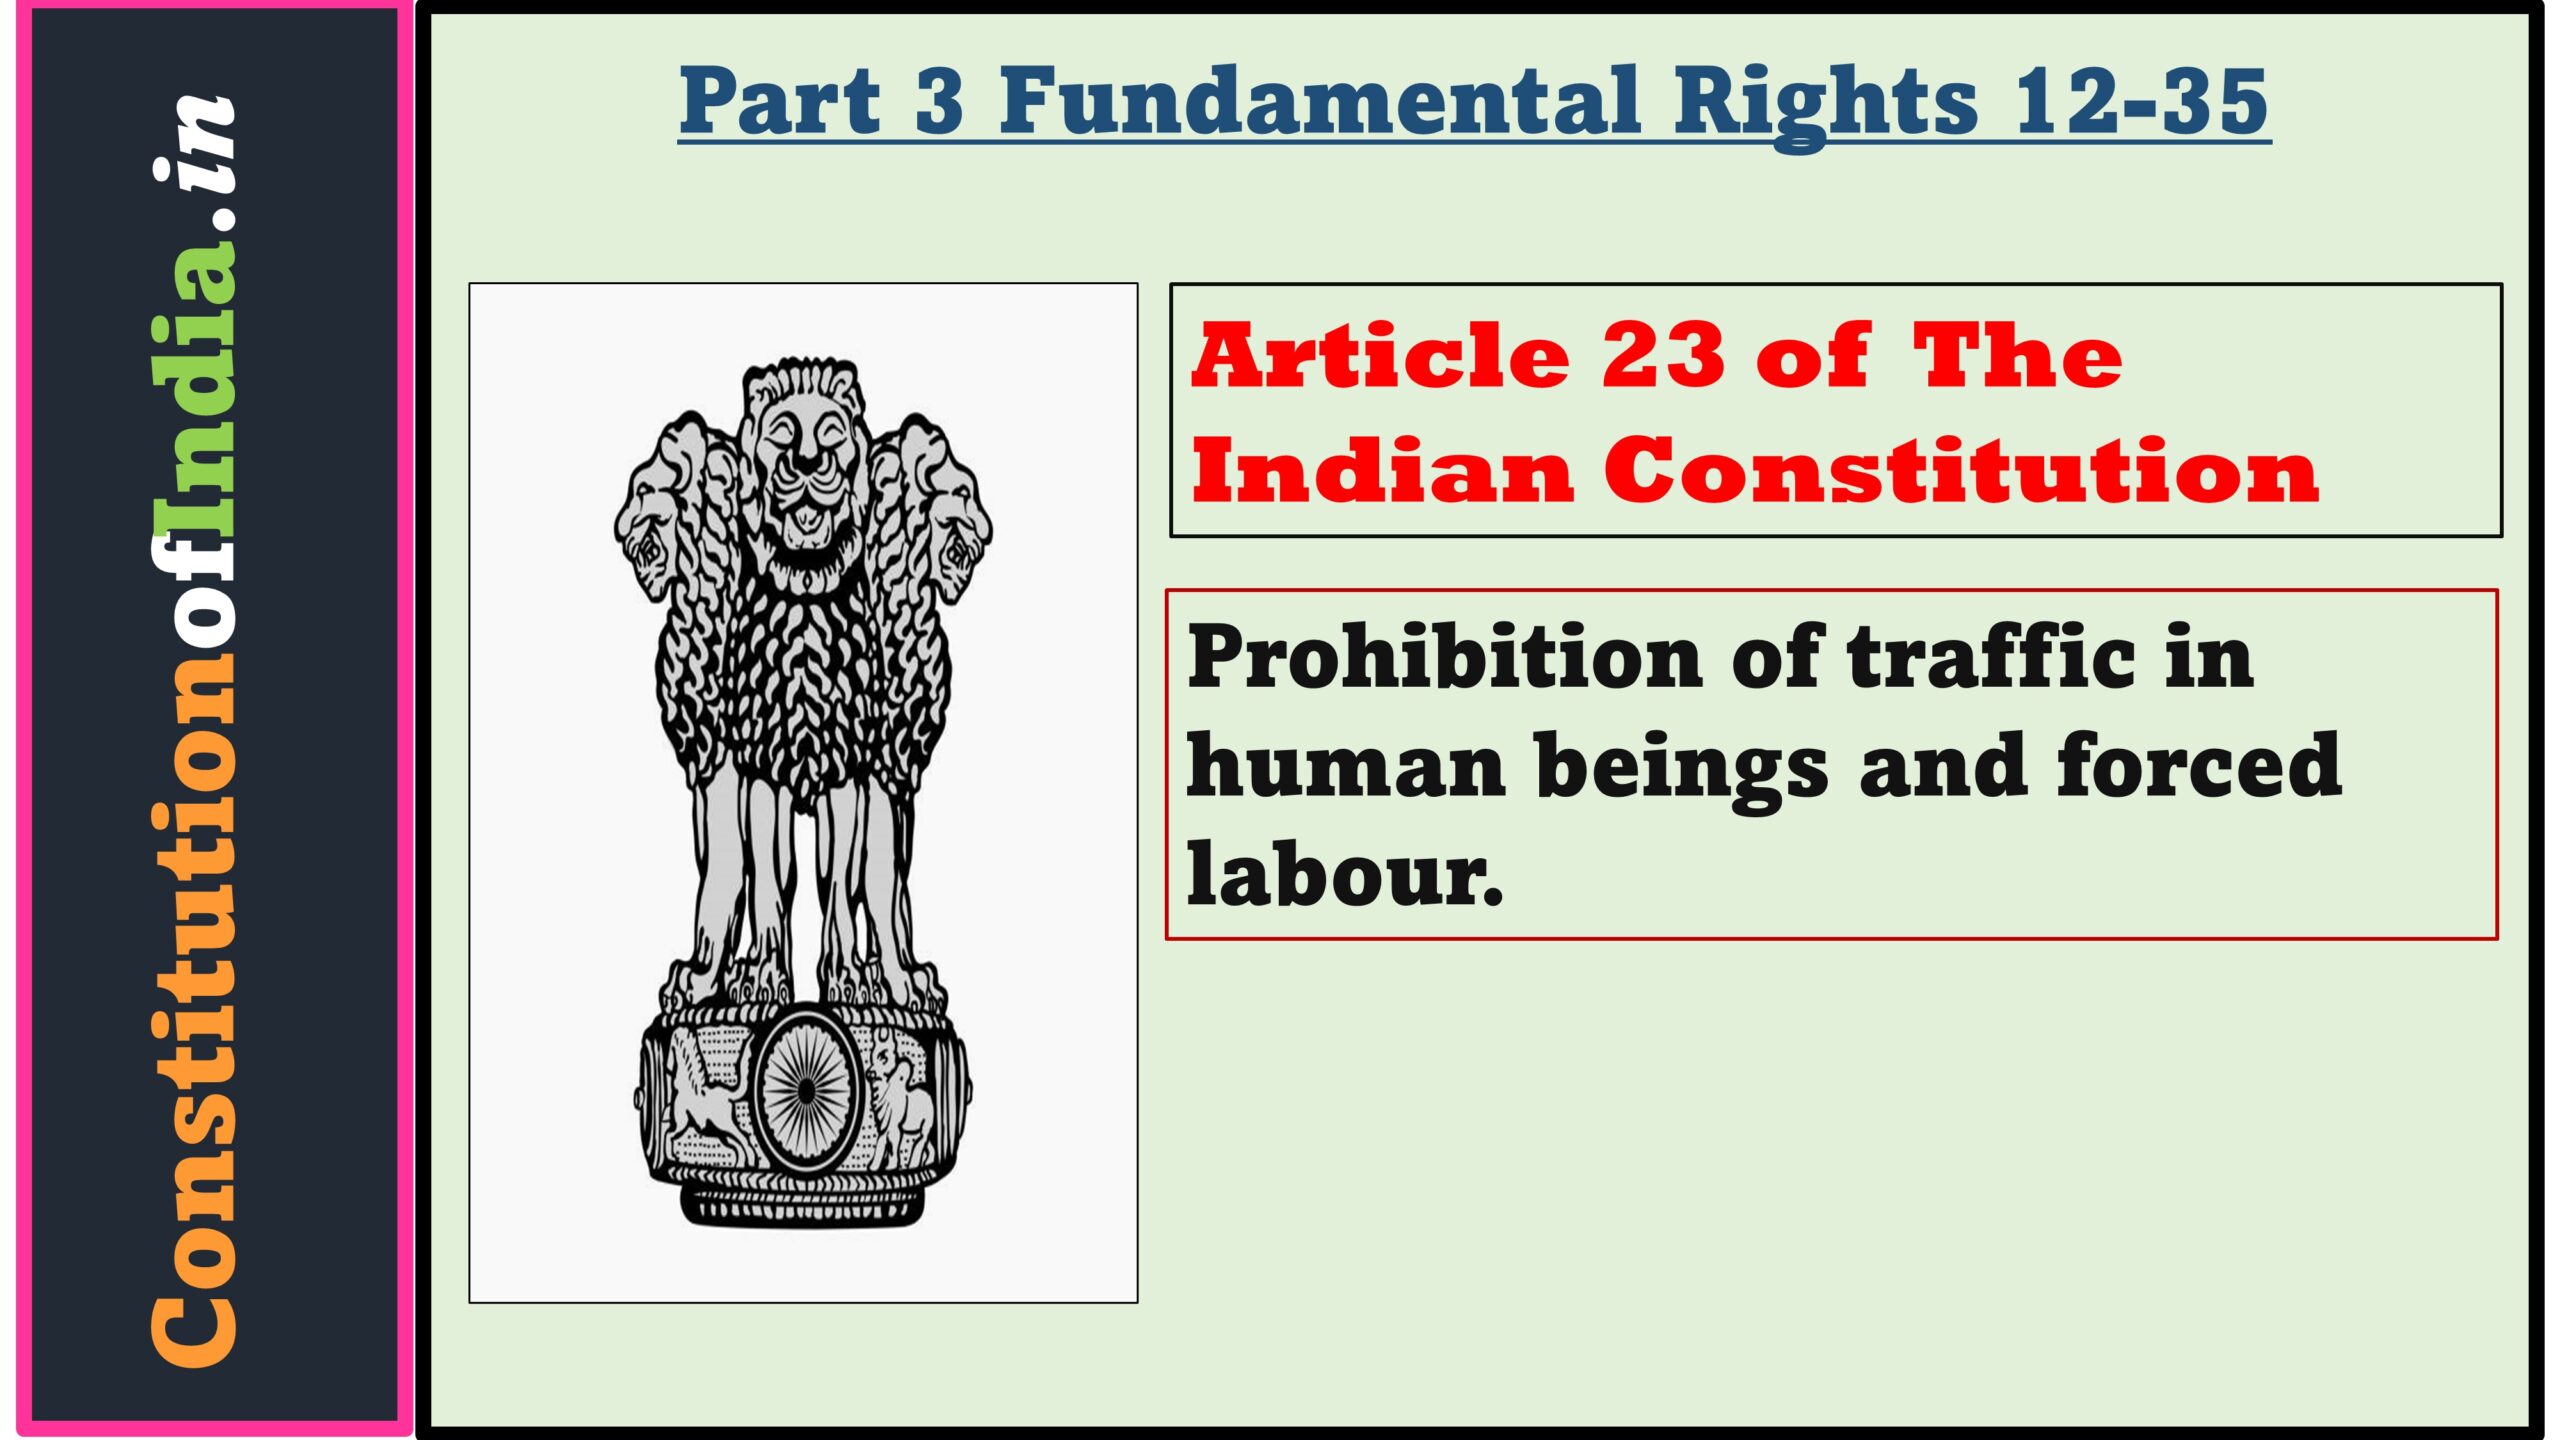 Article 23 of Indian Constitution: Prohibition of traffic in human beings and forced labour.